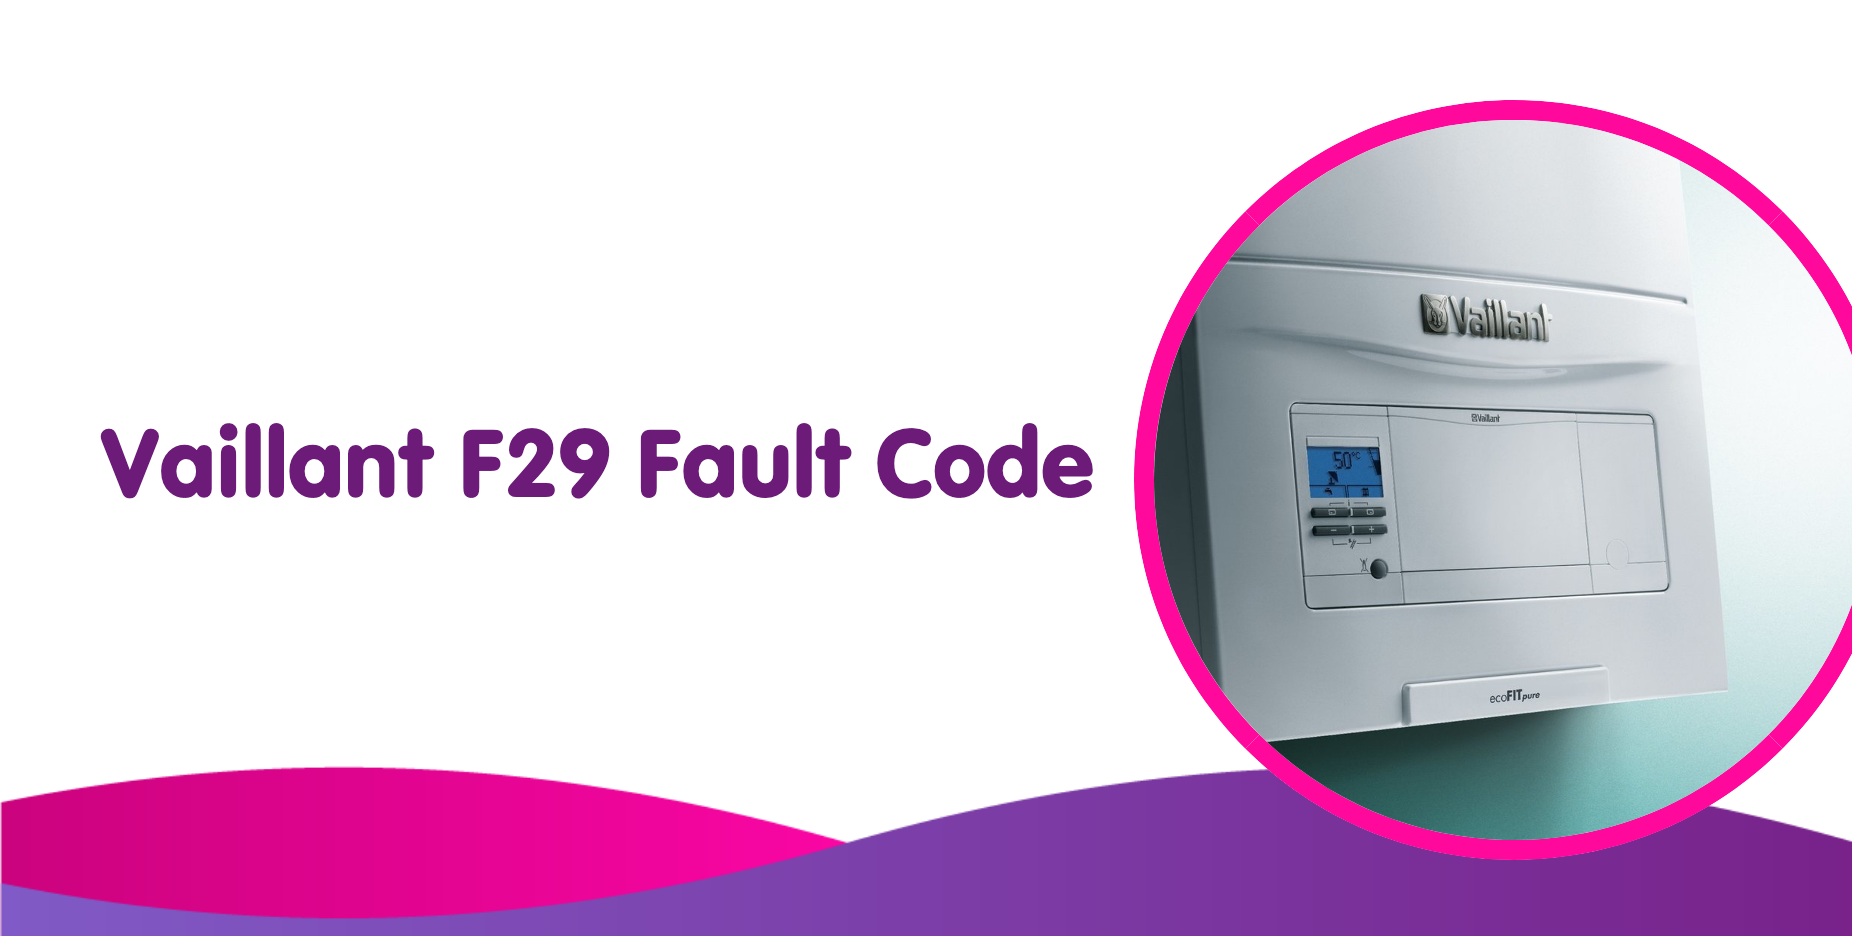 F29 Vaillant Fault Code Meaning, Causes & How To Fix